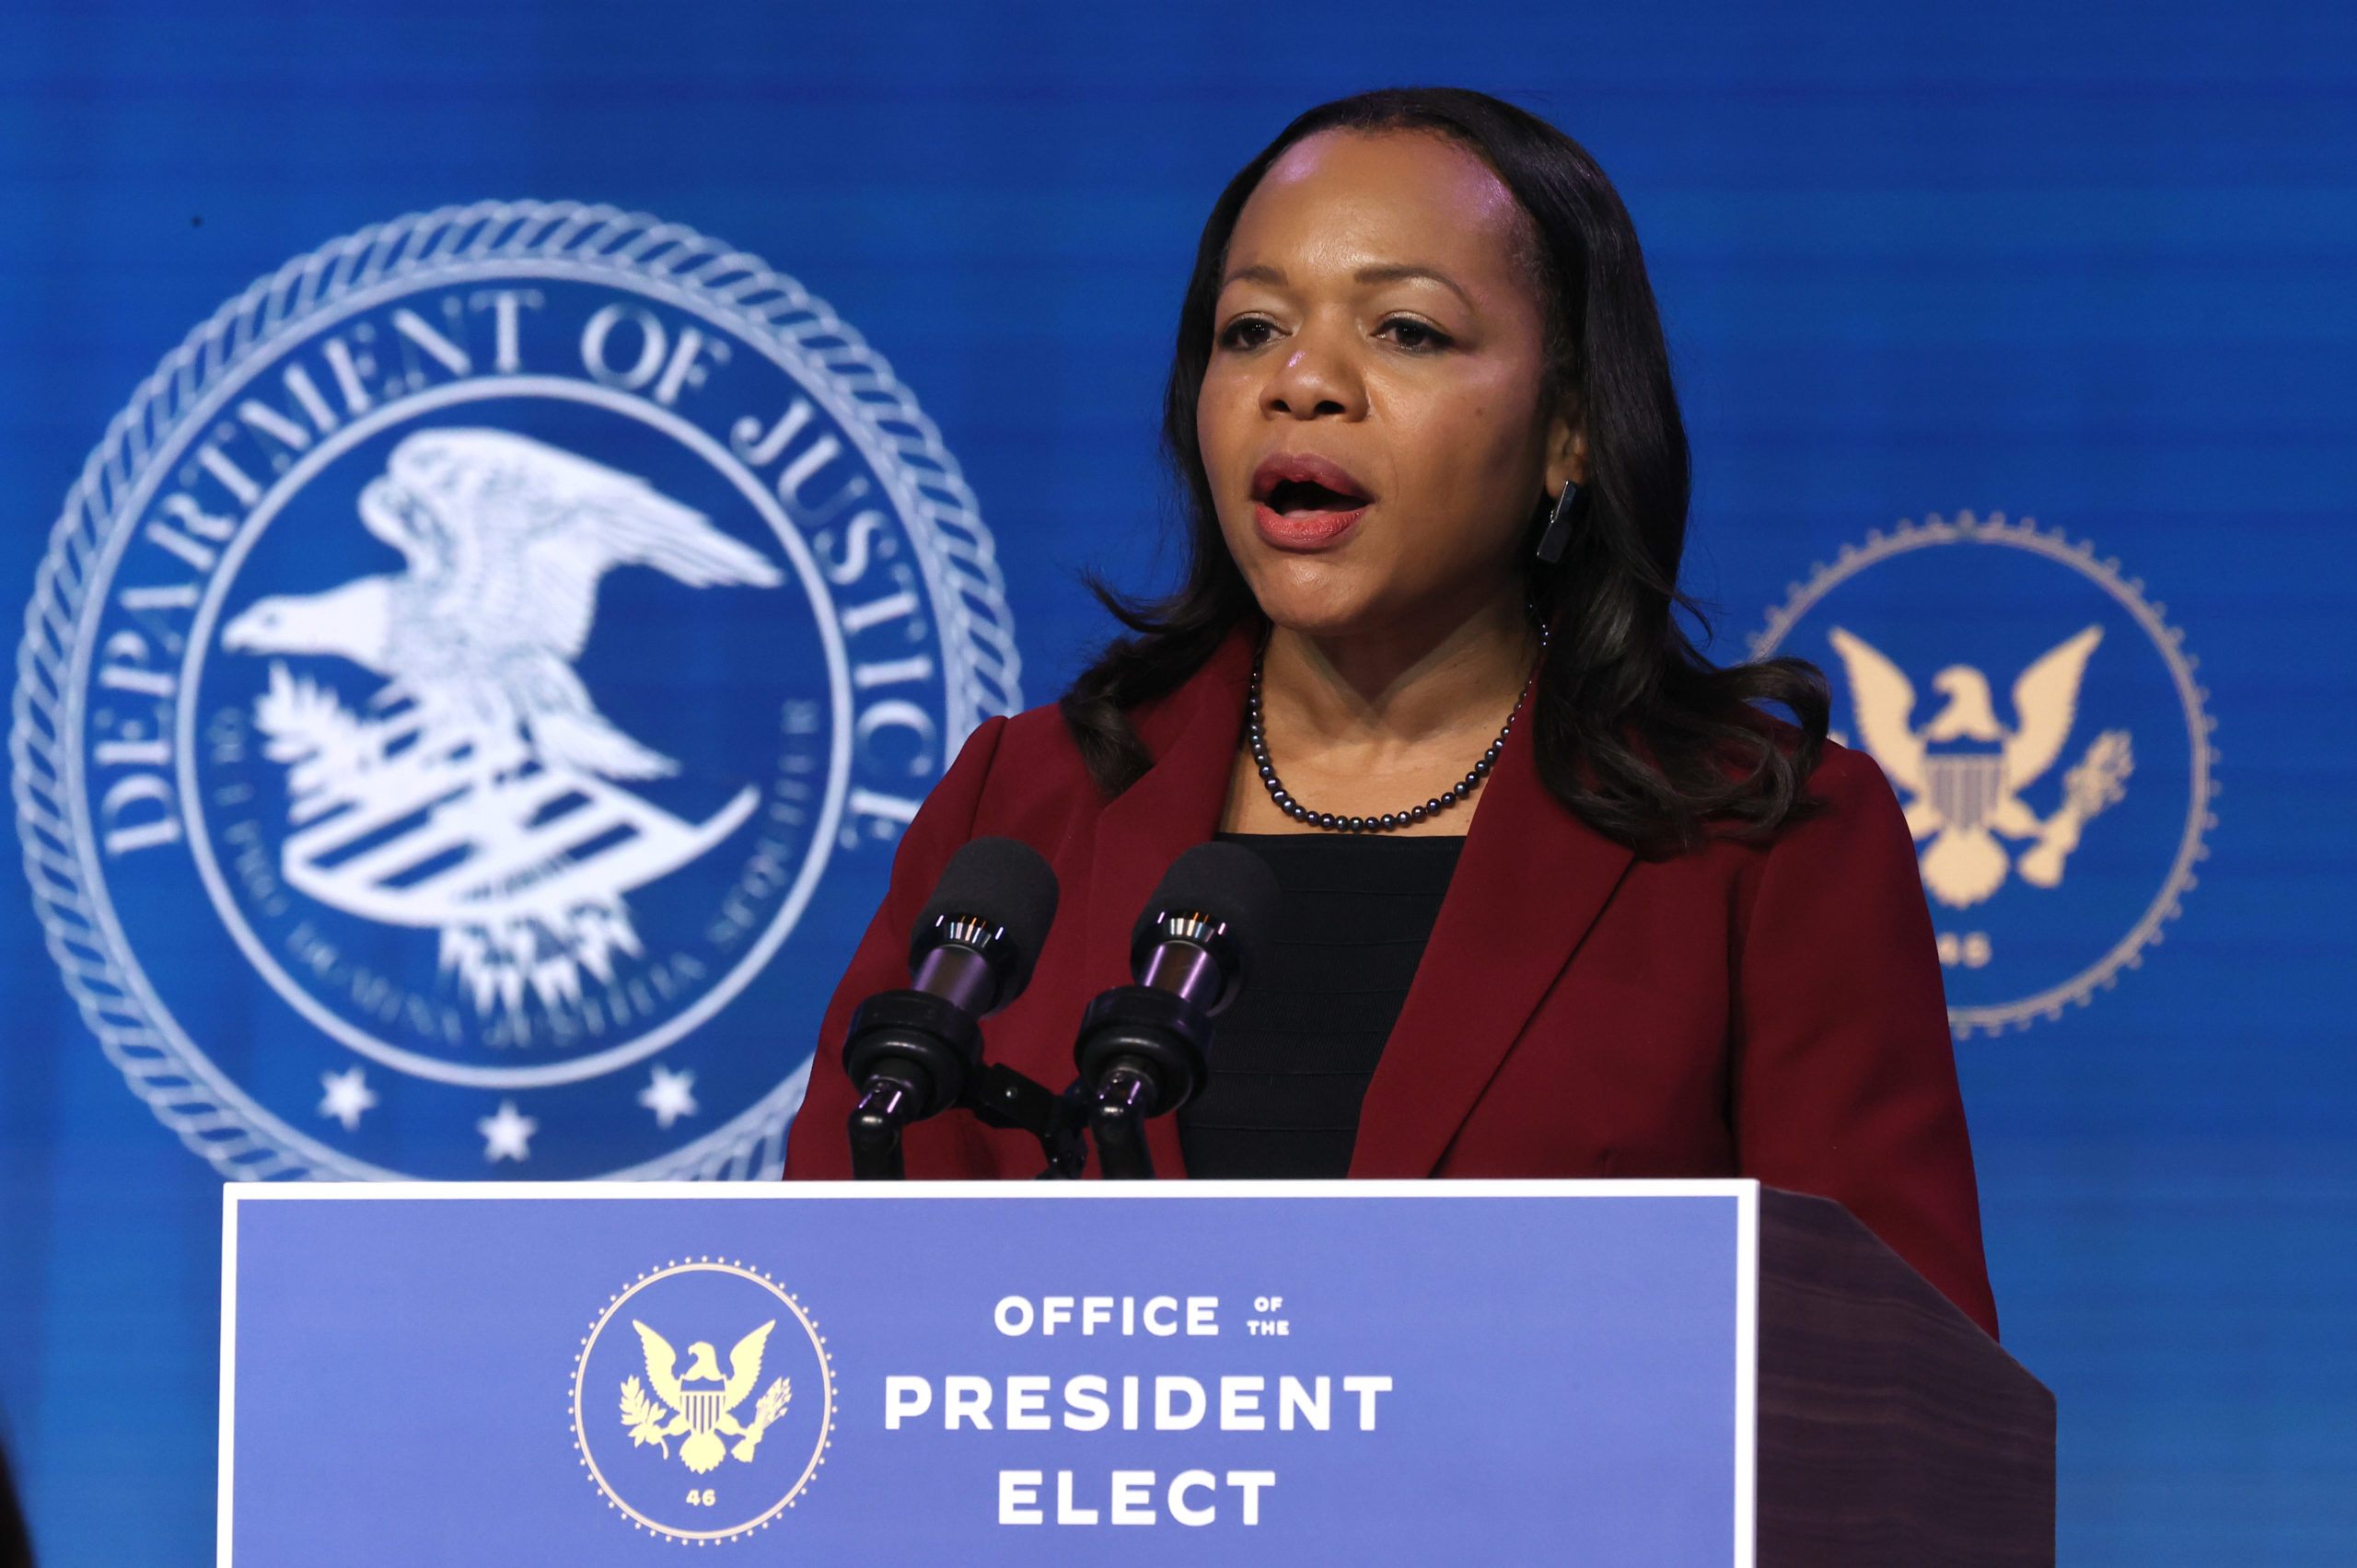 WILMINGTON, DELAWARE - JANUARY 07: Kristen Clarke delivers remarks after being nominated to be civil rights division assistant attorney general by President-elect Joe Biden at The Queen theater January 07, 2021 in Wilmington, Delaware. From 2014 to 2017 Gupta served as the head of the Justice Department’s Civil Rights Division during the Obama Administration. (Photo by Chip Somodevilla/Getty Images)